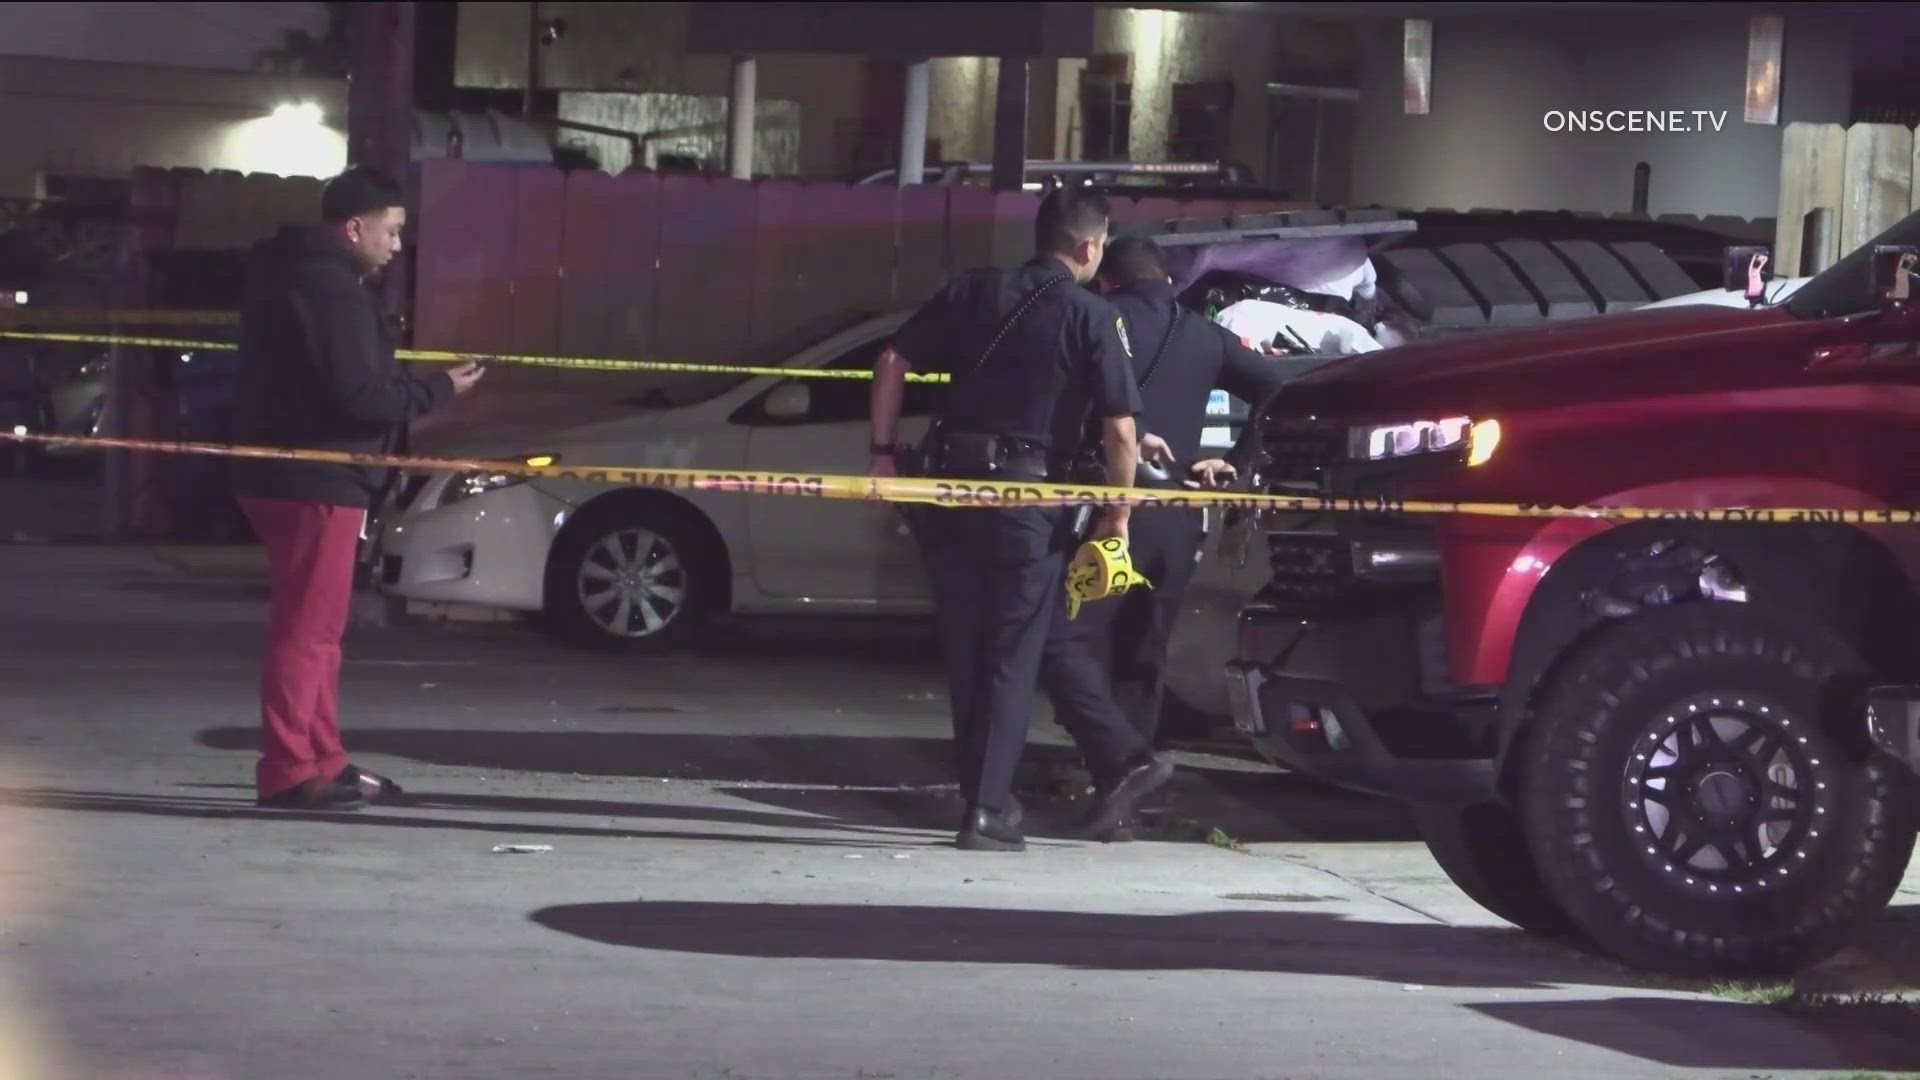 San Diego police are searching for a person who shot and killed a man in City Heights Tuesday morning.